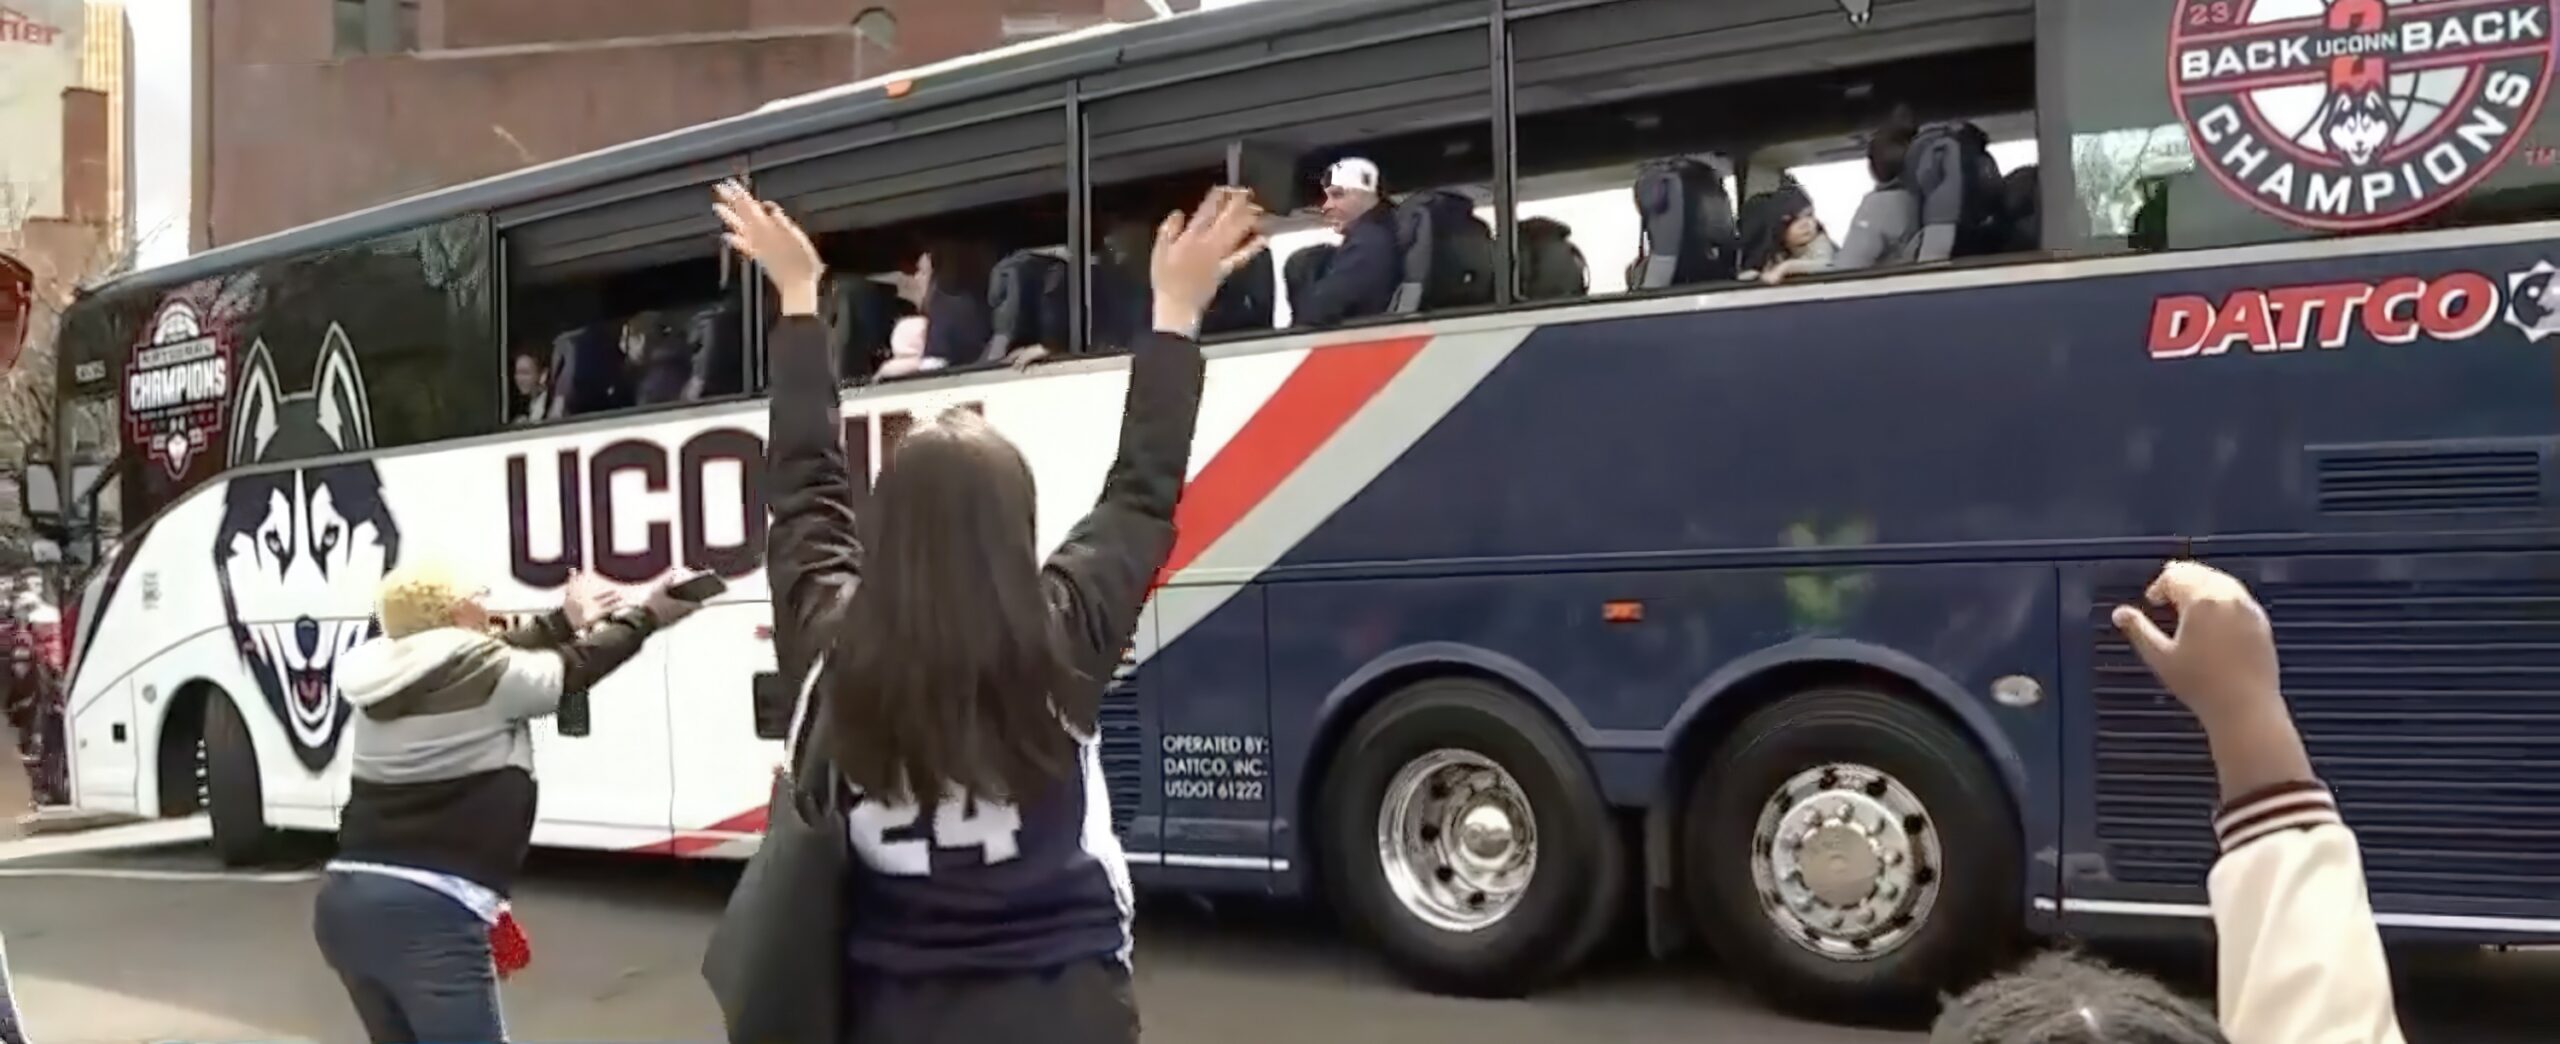 Celebrating Victory: DATTCO Drives UConn Huskies in Championship Parade